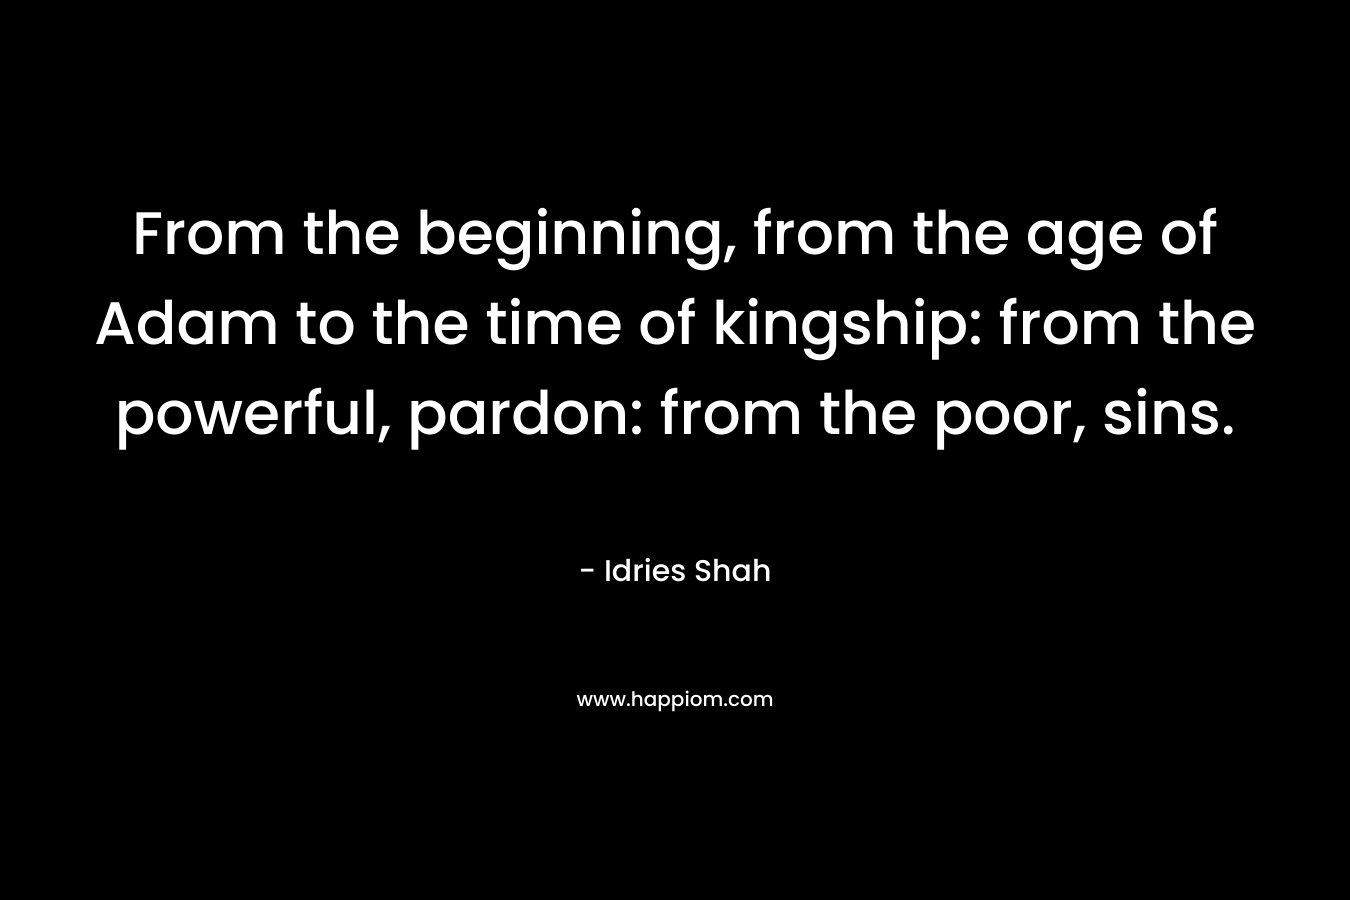 From the beginning, from the age of Adam to the time of kingship: from the powerful, pardon: from the poor, sins. – Idries Shah